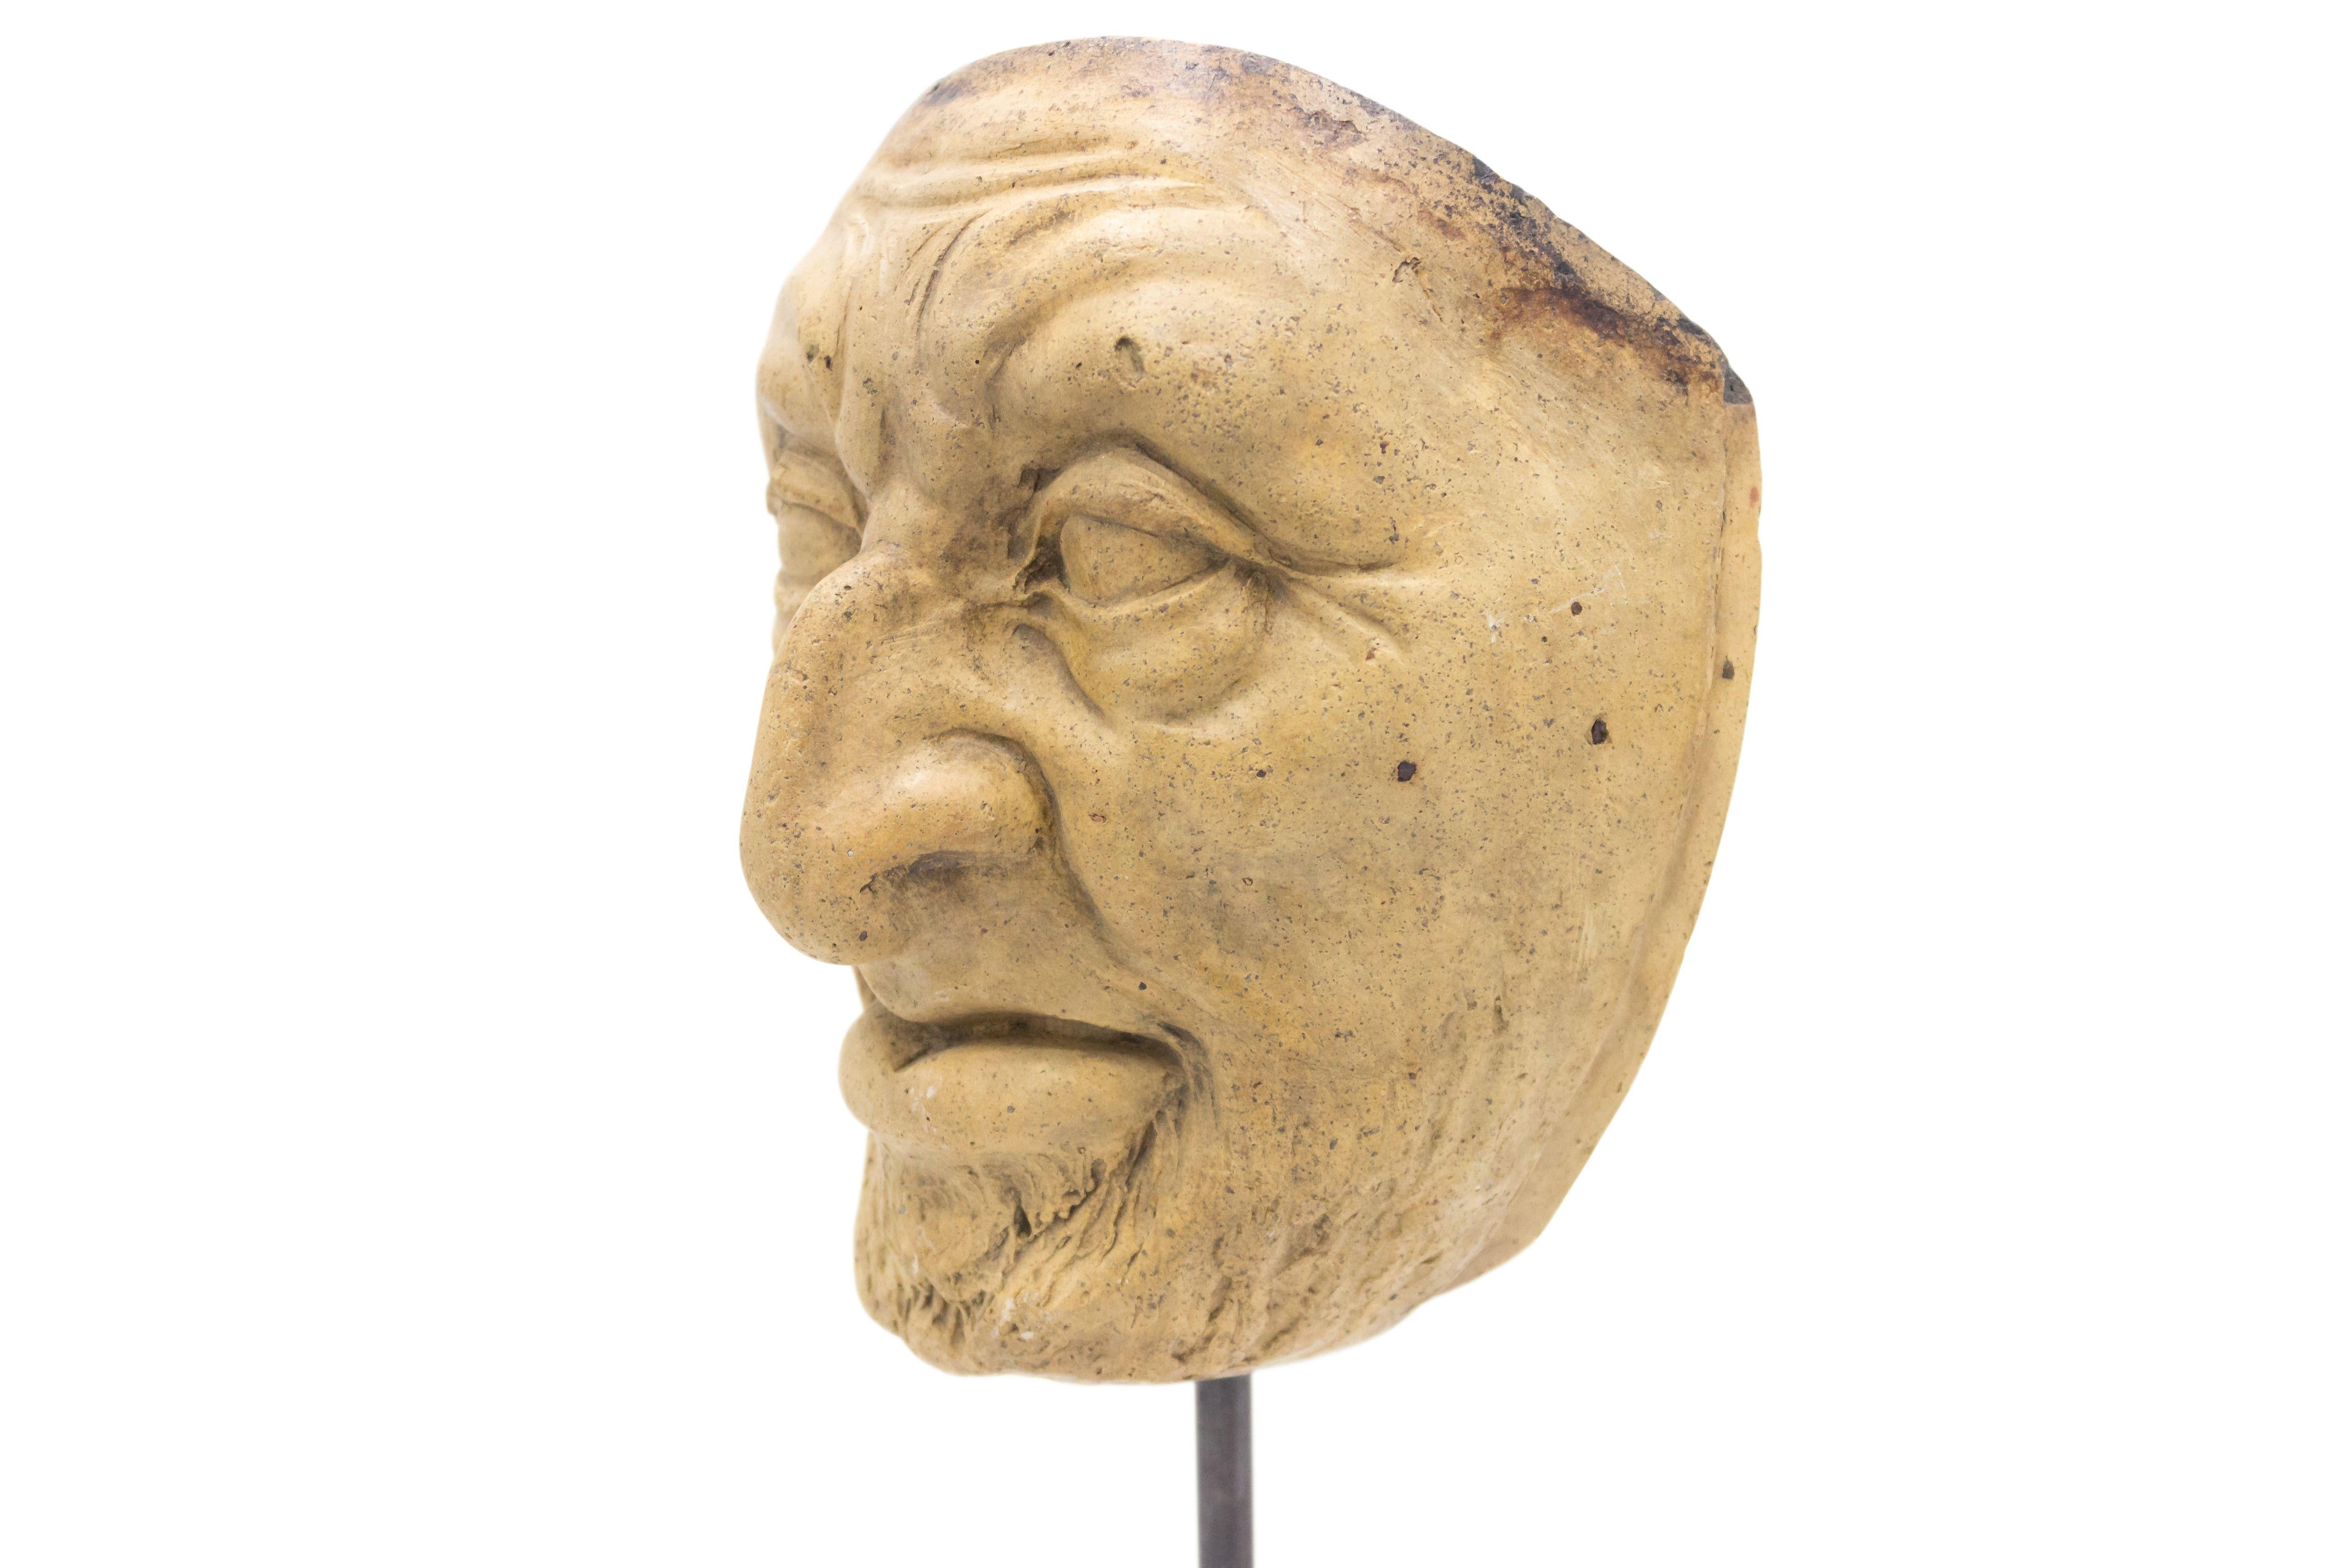 Continental German (late 19th Cent) sculpted terra-cotta master mask mold of a grimacing old man with a hooked nose & beard displayed on a square black marble base stand (part of a collection).
 